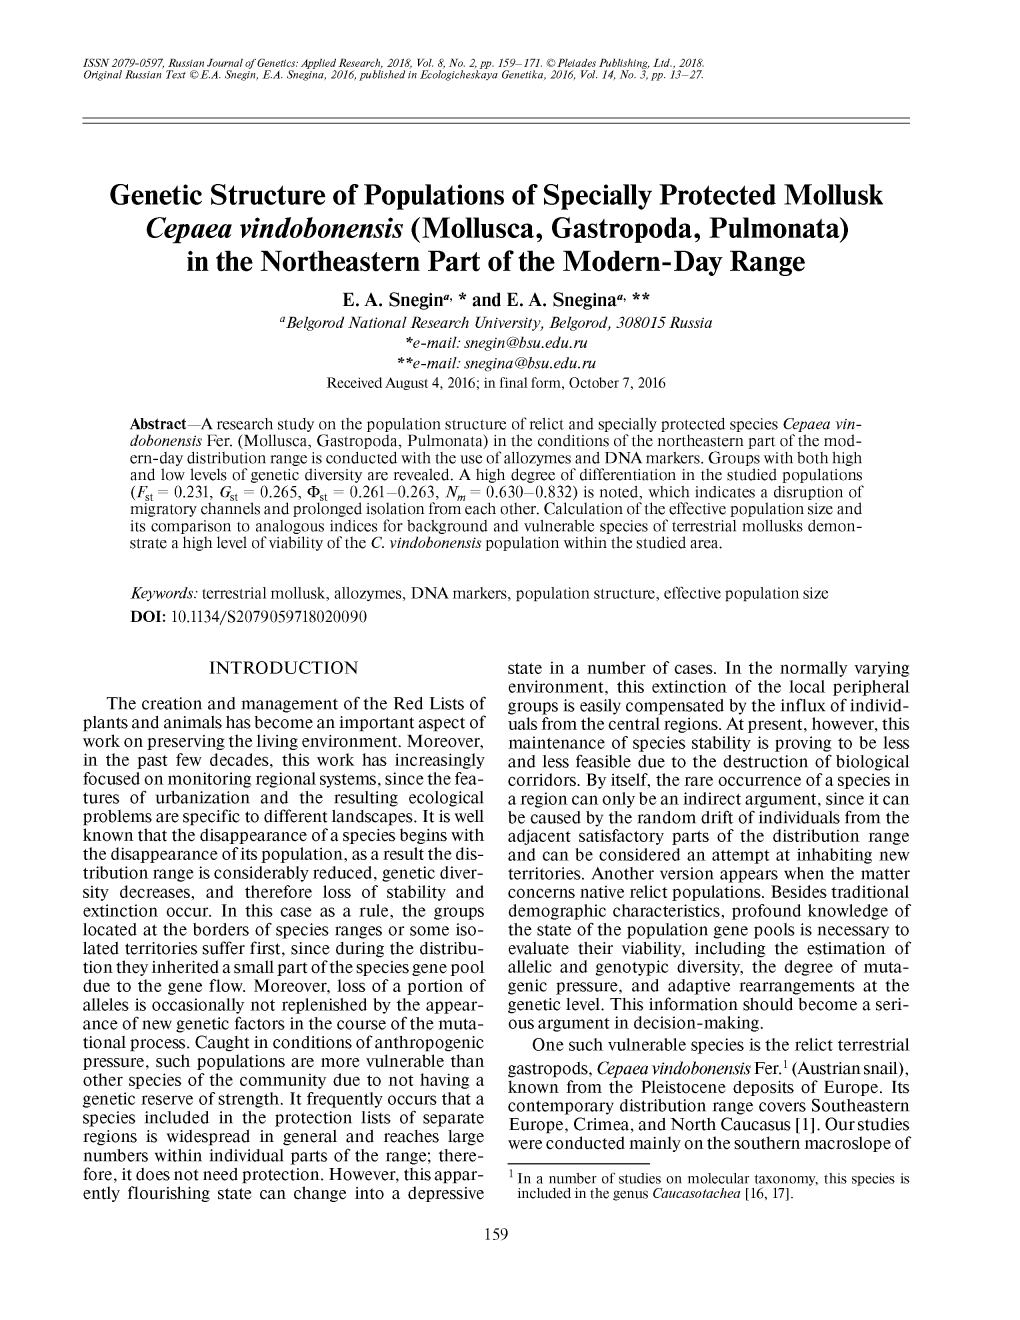 Genetic Structure of Populations of Specially Protected Mollusk